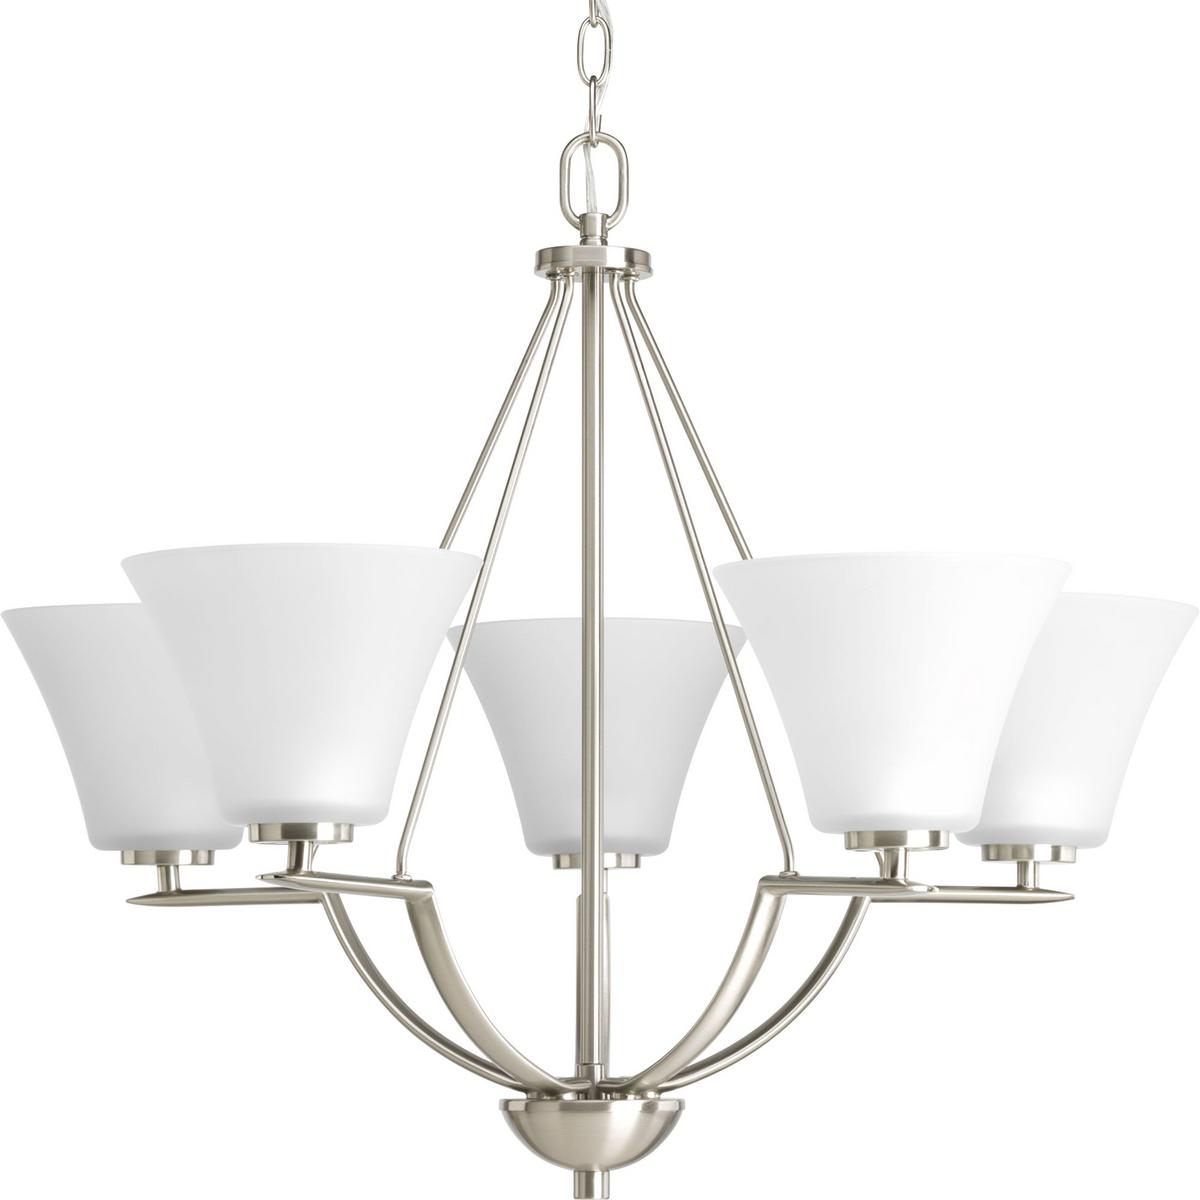 Hubbell P4623-09 Five-light chandelier with white etched glass from the Bravo collection. Linear elements stream throughout the fixture to compose a relaxed but exotic ambiance. Generously scaled glass shades add distinction against the Brushed Nickel finish and provide p